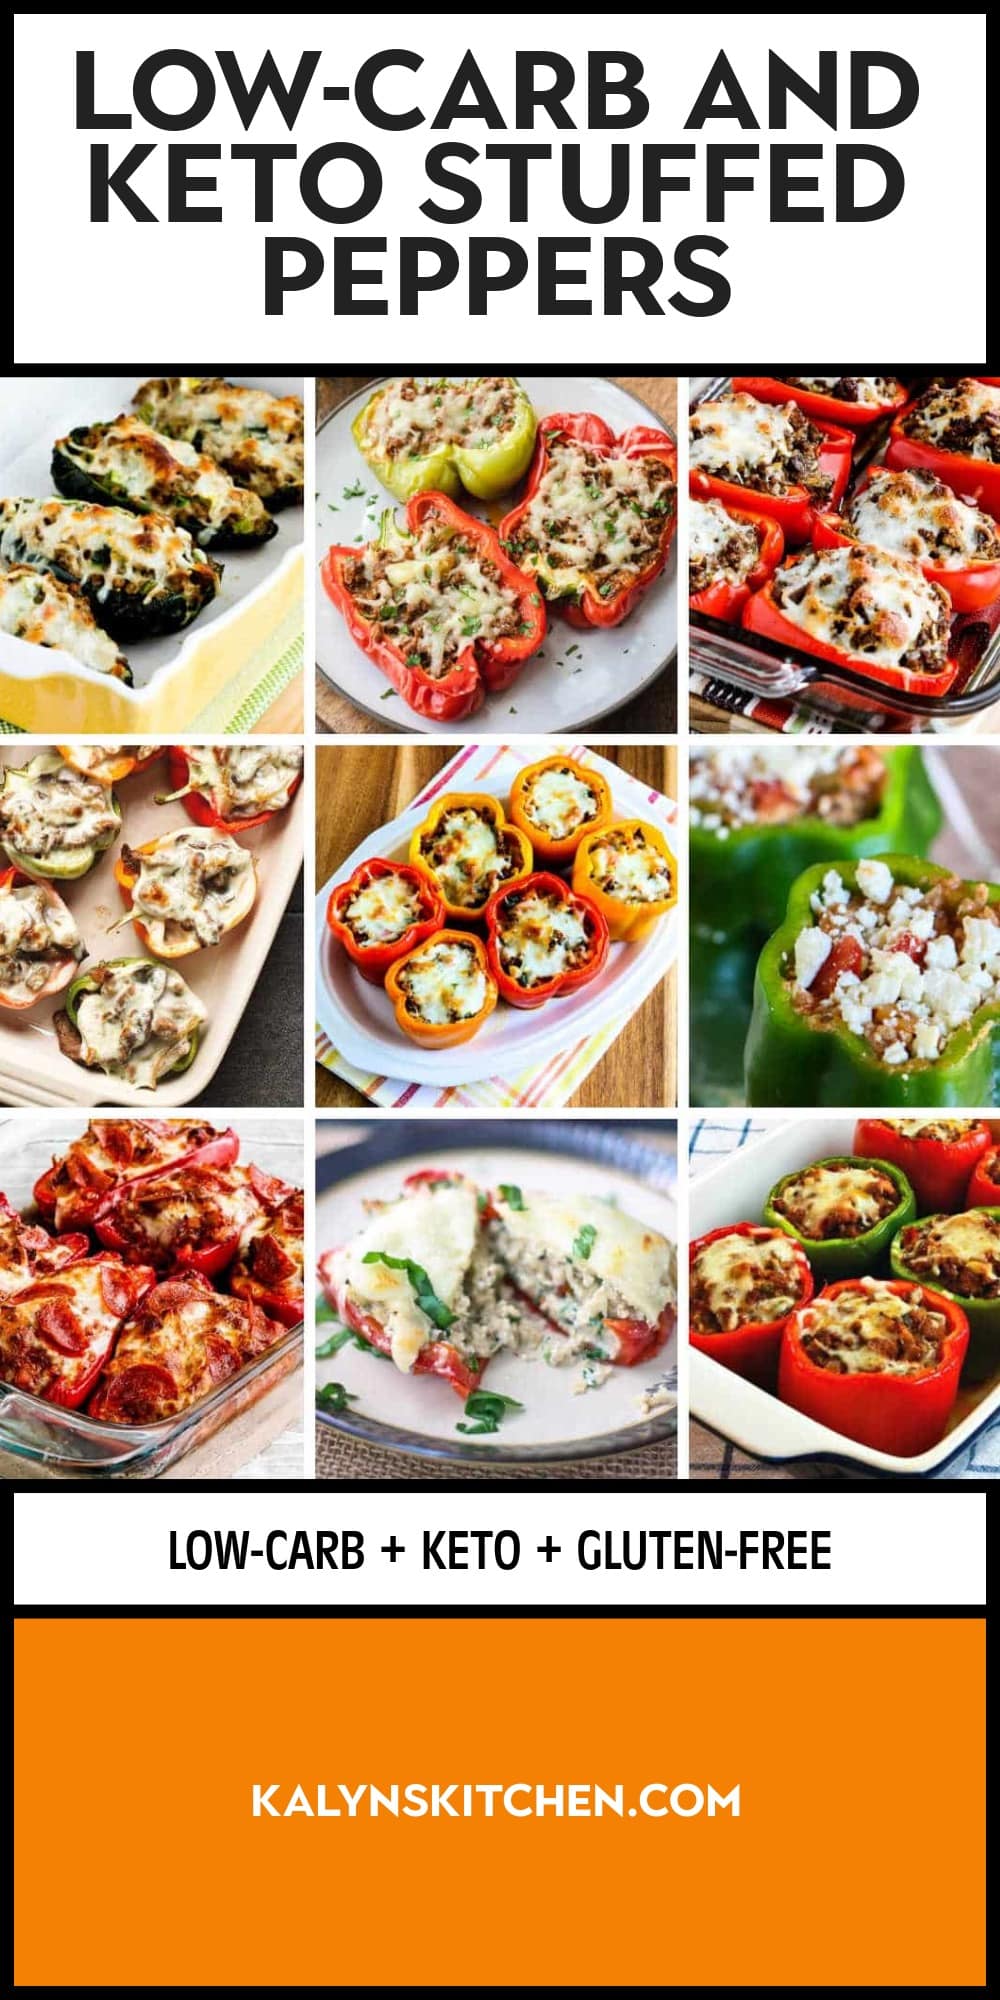 Pinterest image of Low-Carb and Keto Stuffed Peppers